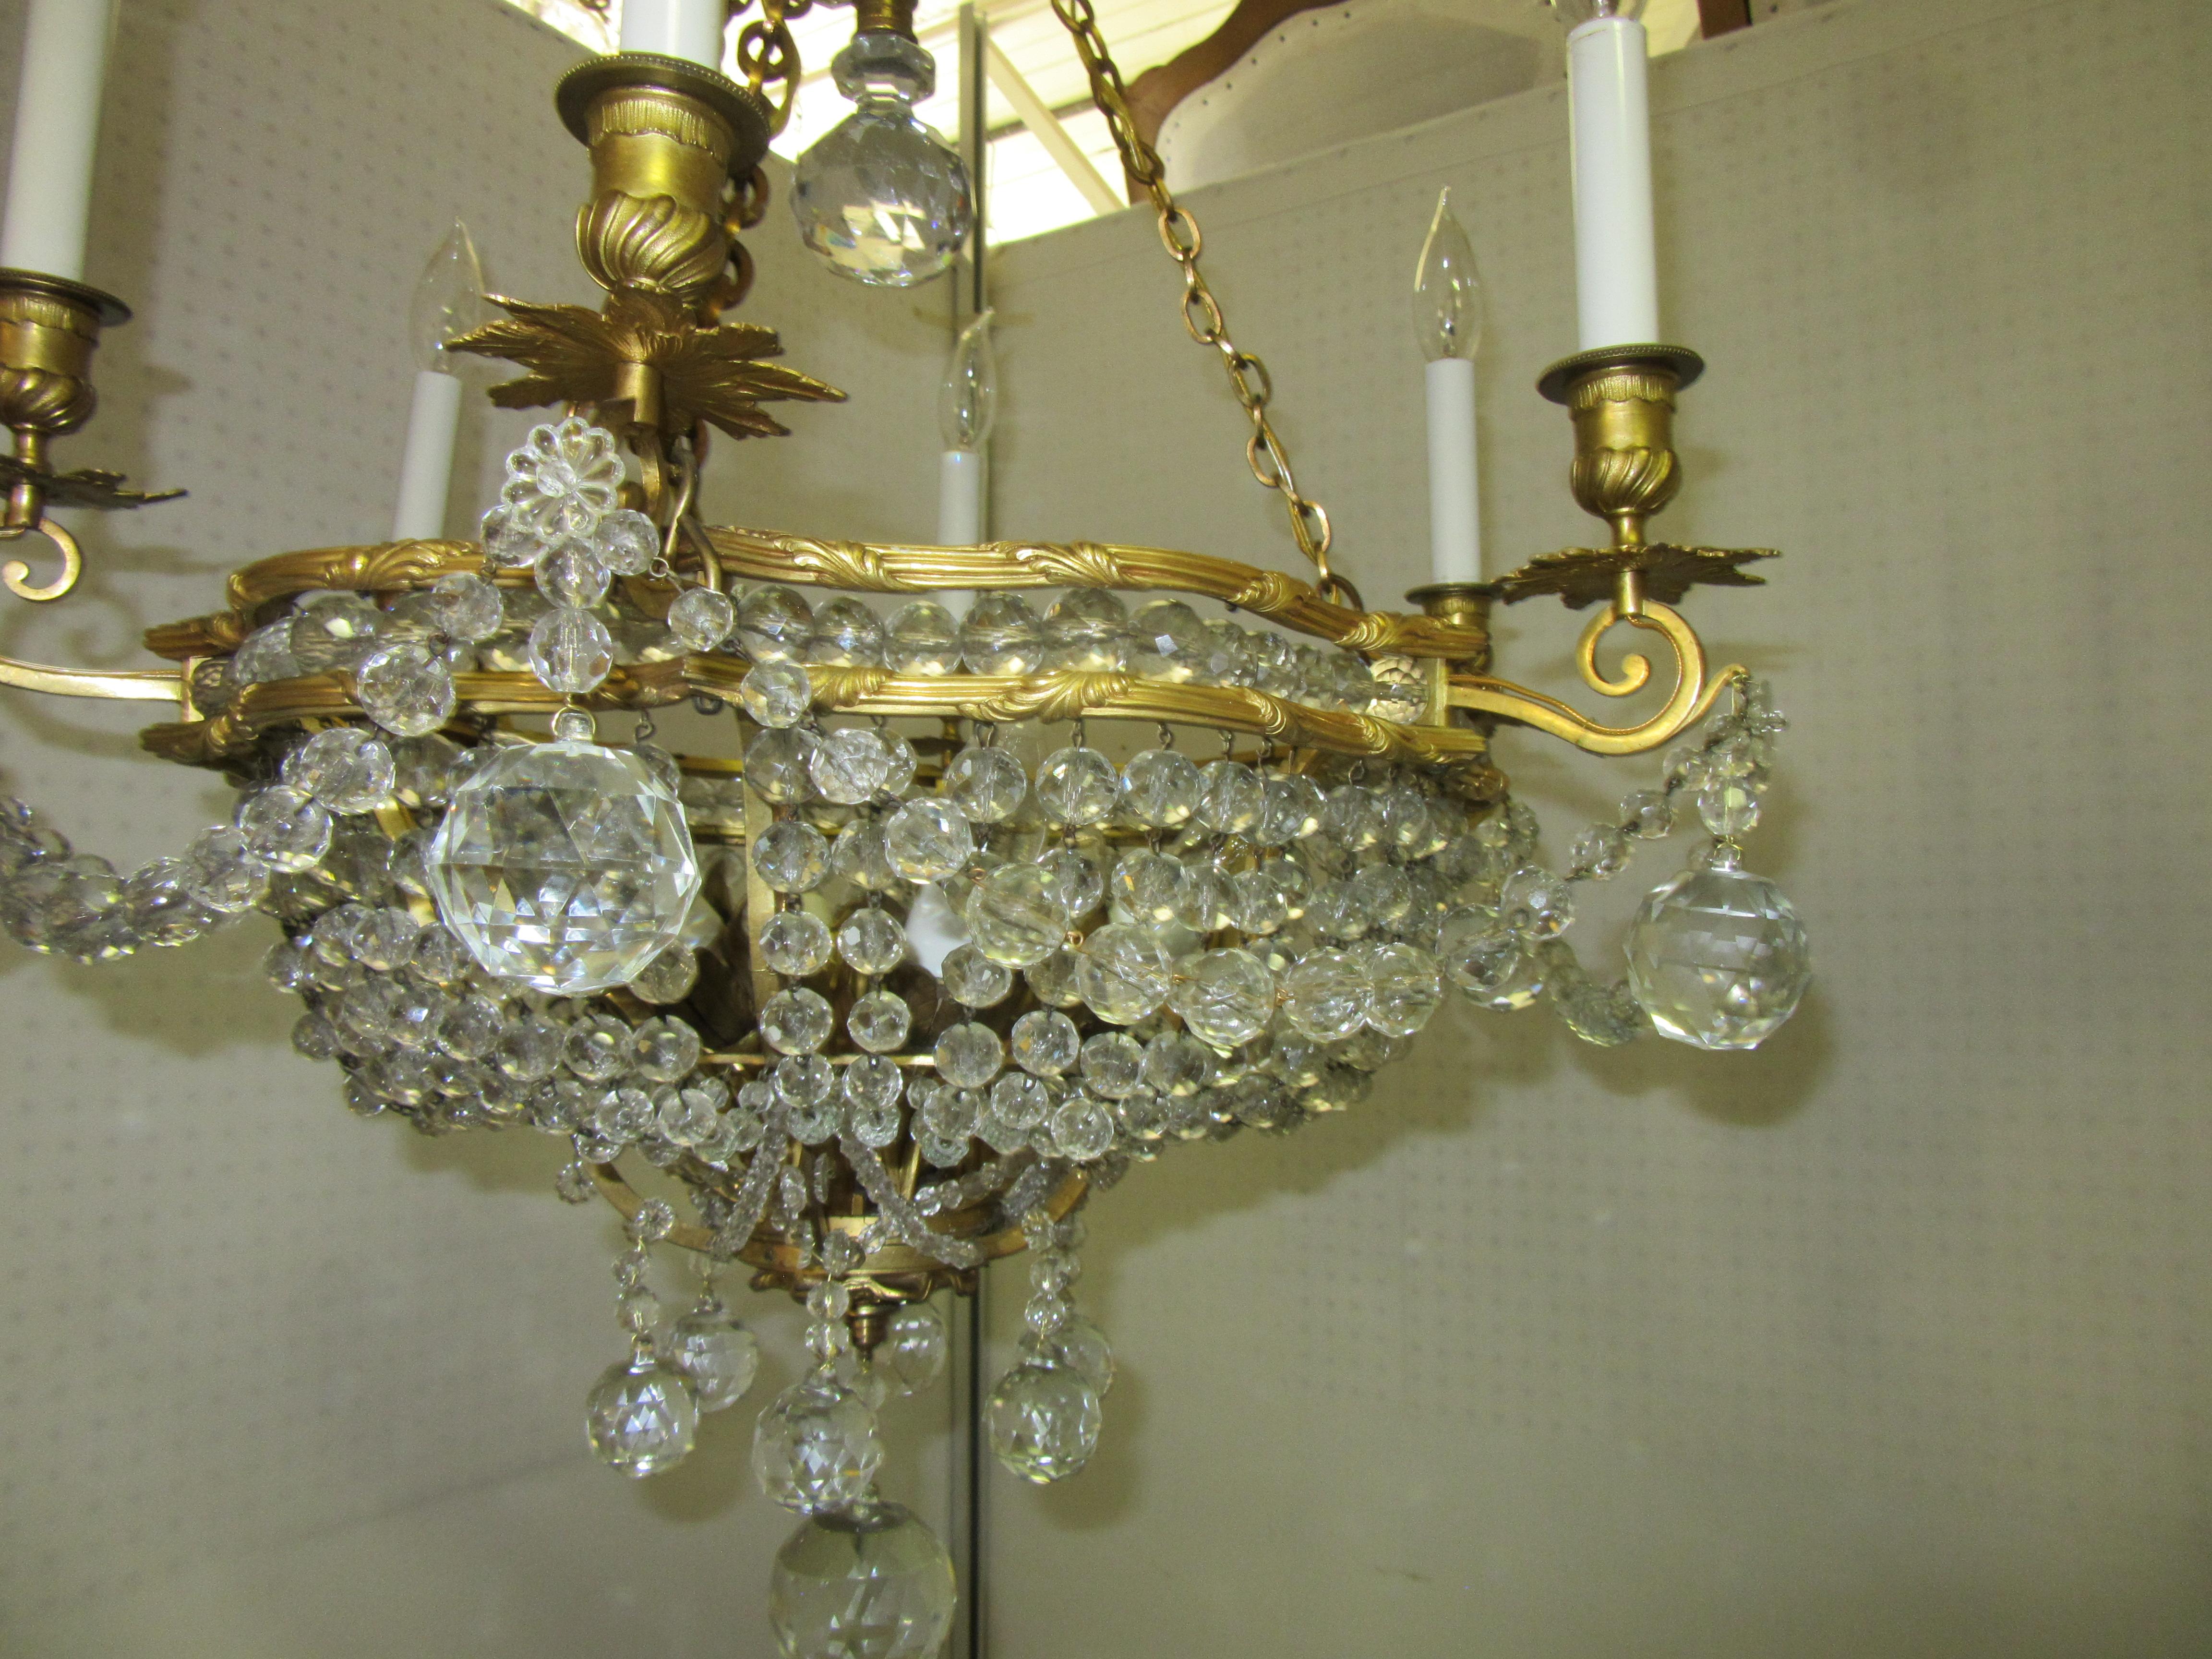 Italian French Belle Époque Gilt Bronze Chandelier with Cut Crystal Elements